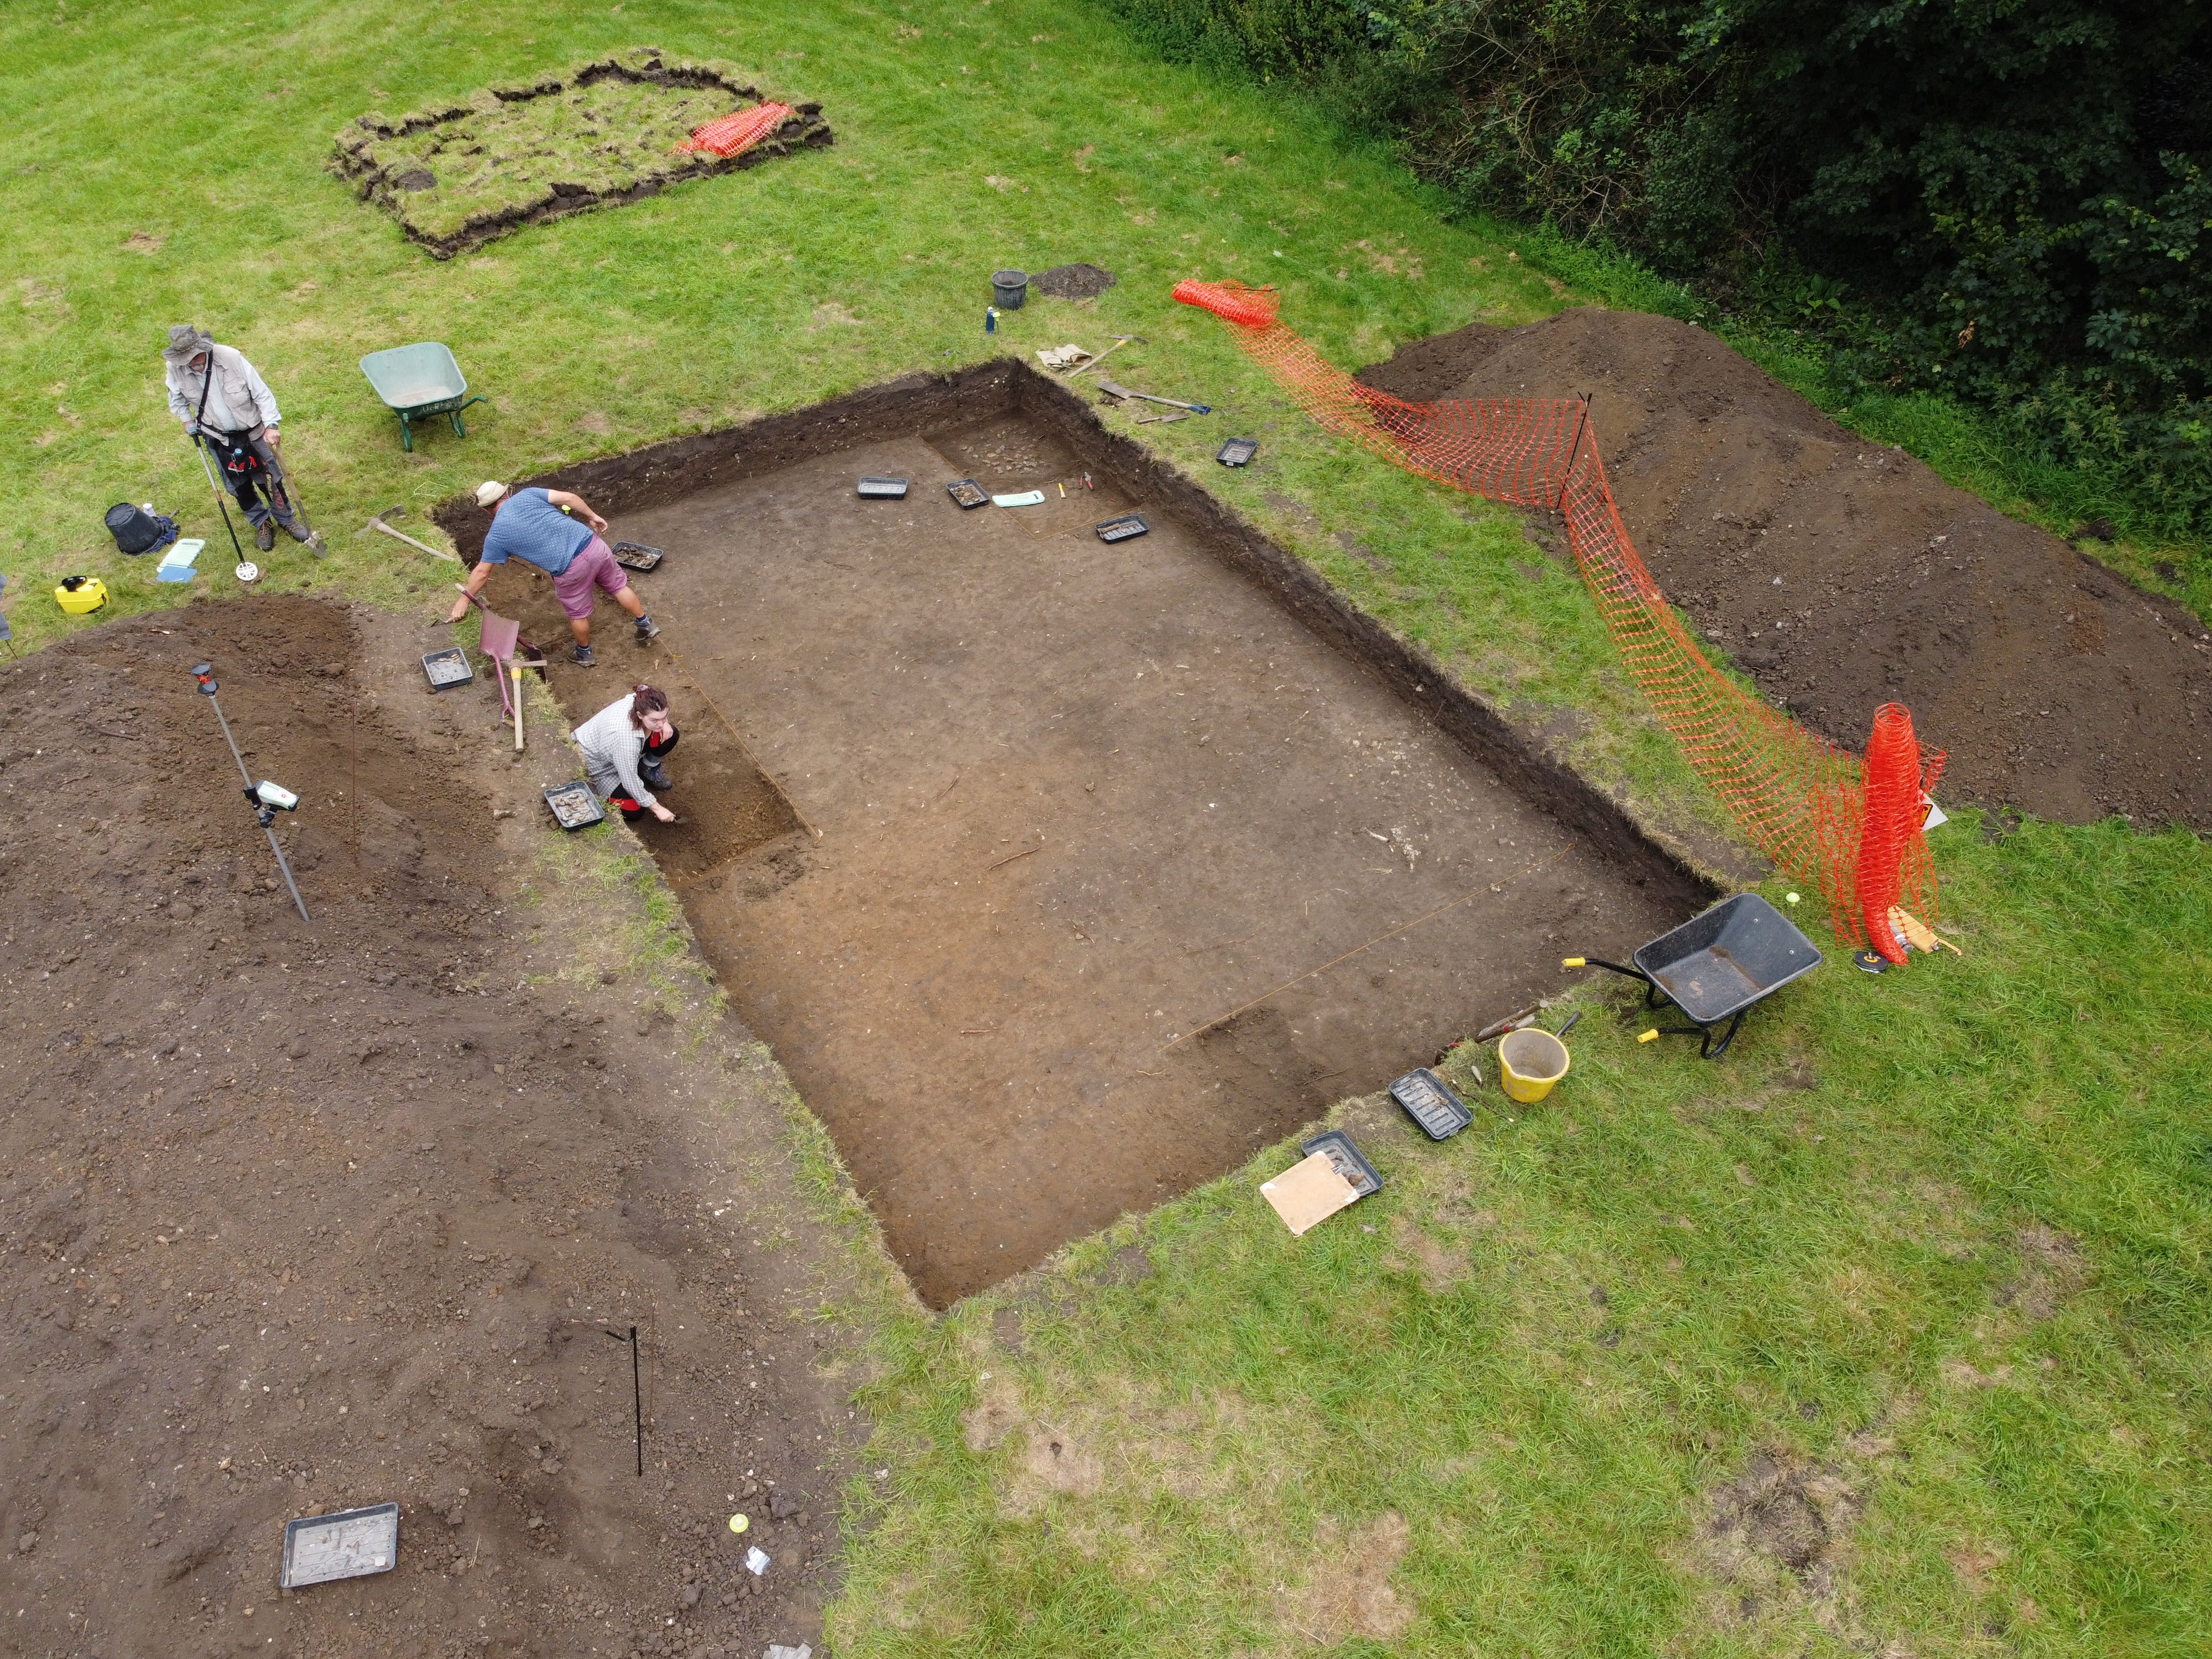 University of Reading archaeologists are working to uncover extensive remains of the large monastery established in around 700AD